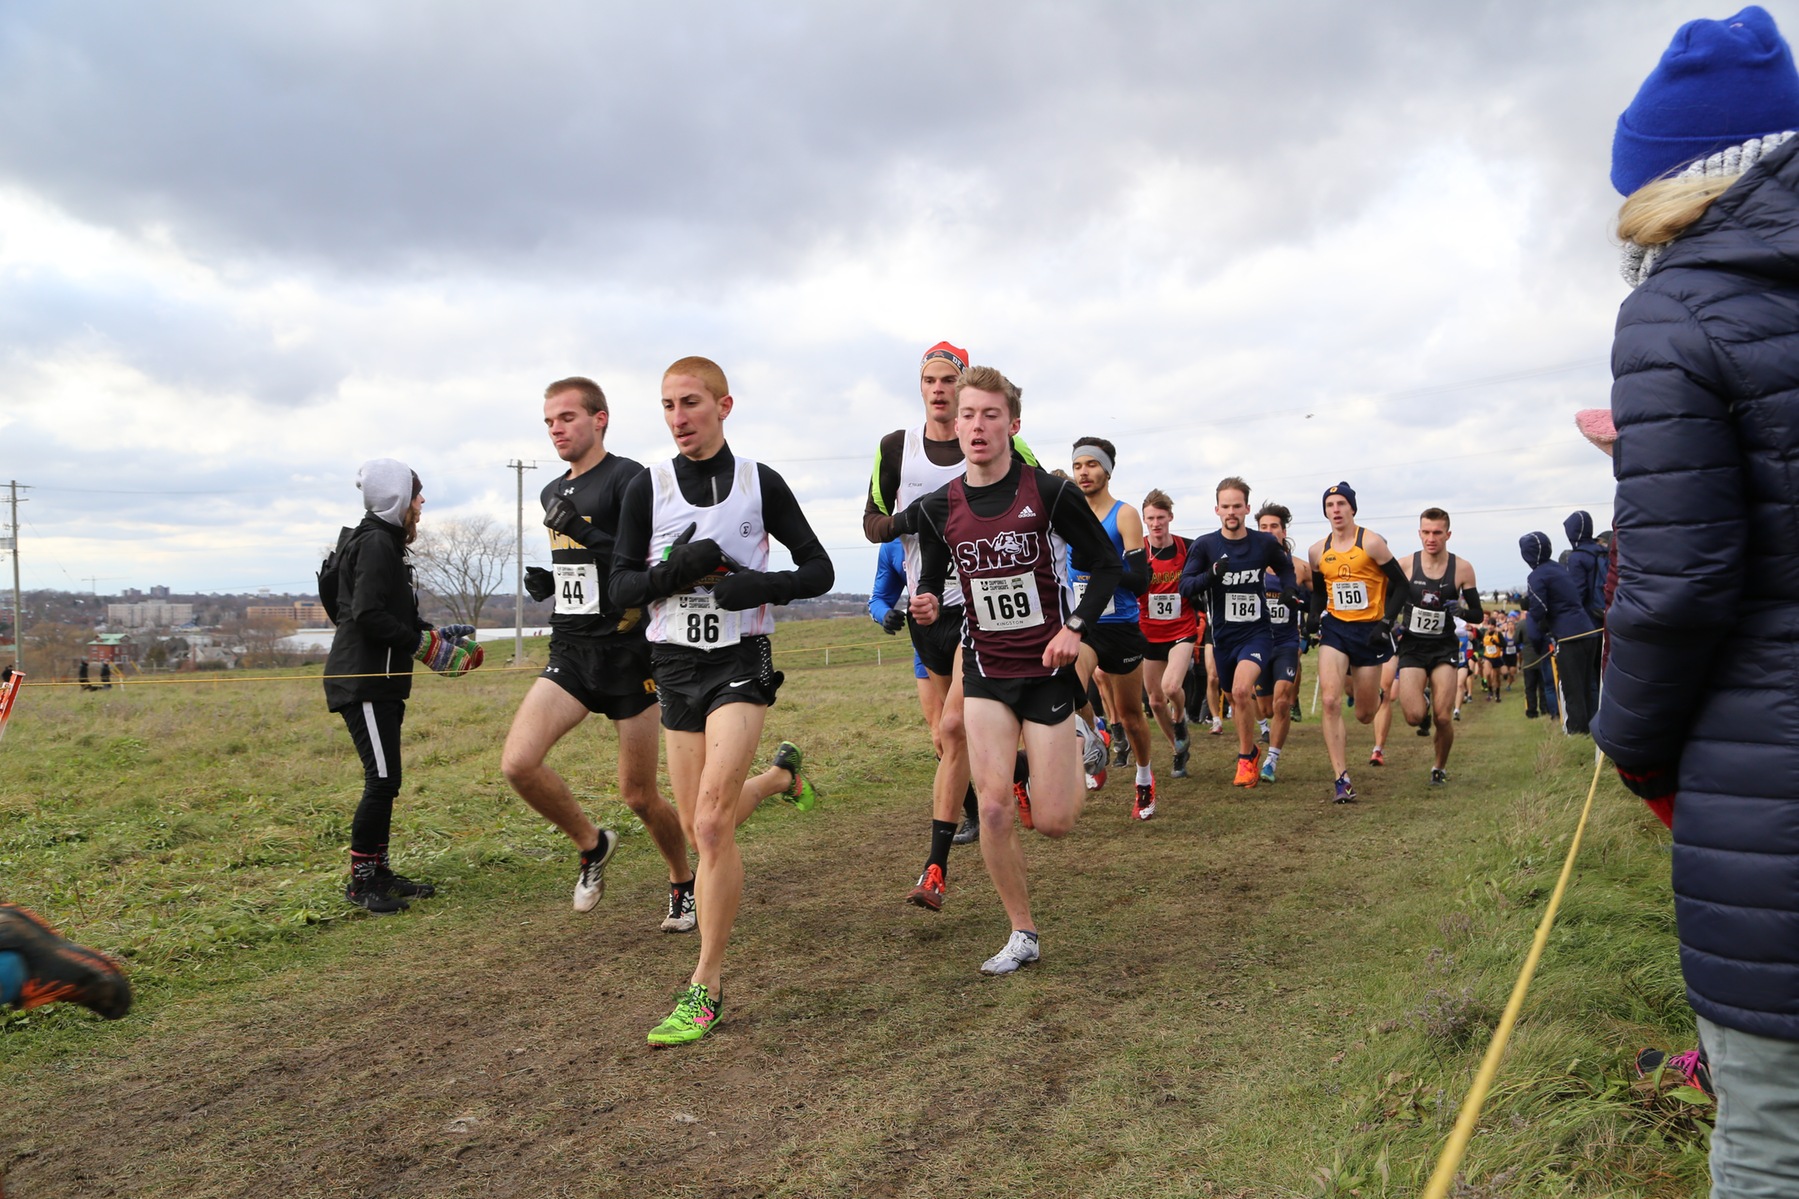 Peverill runs personal best at National Cross Country Championships